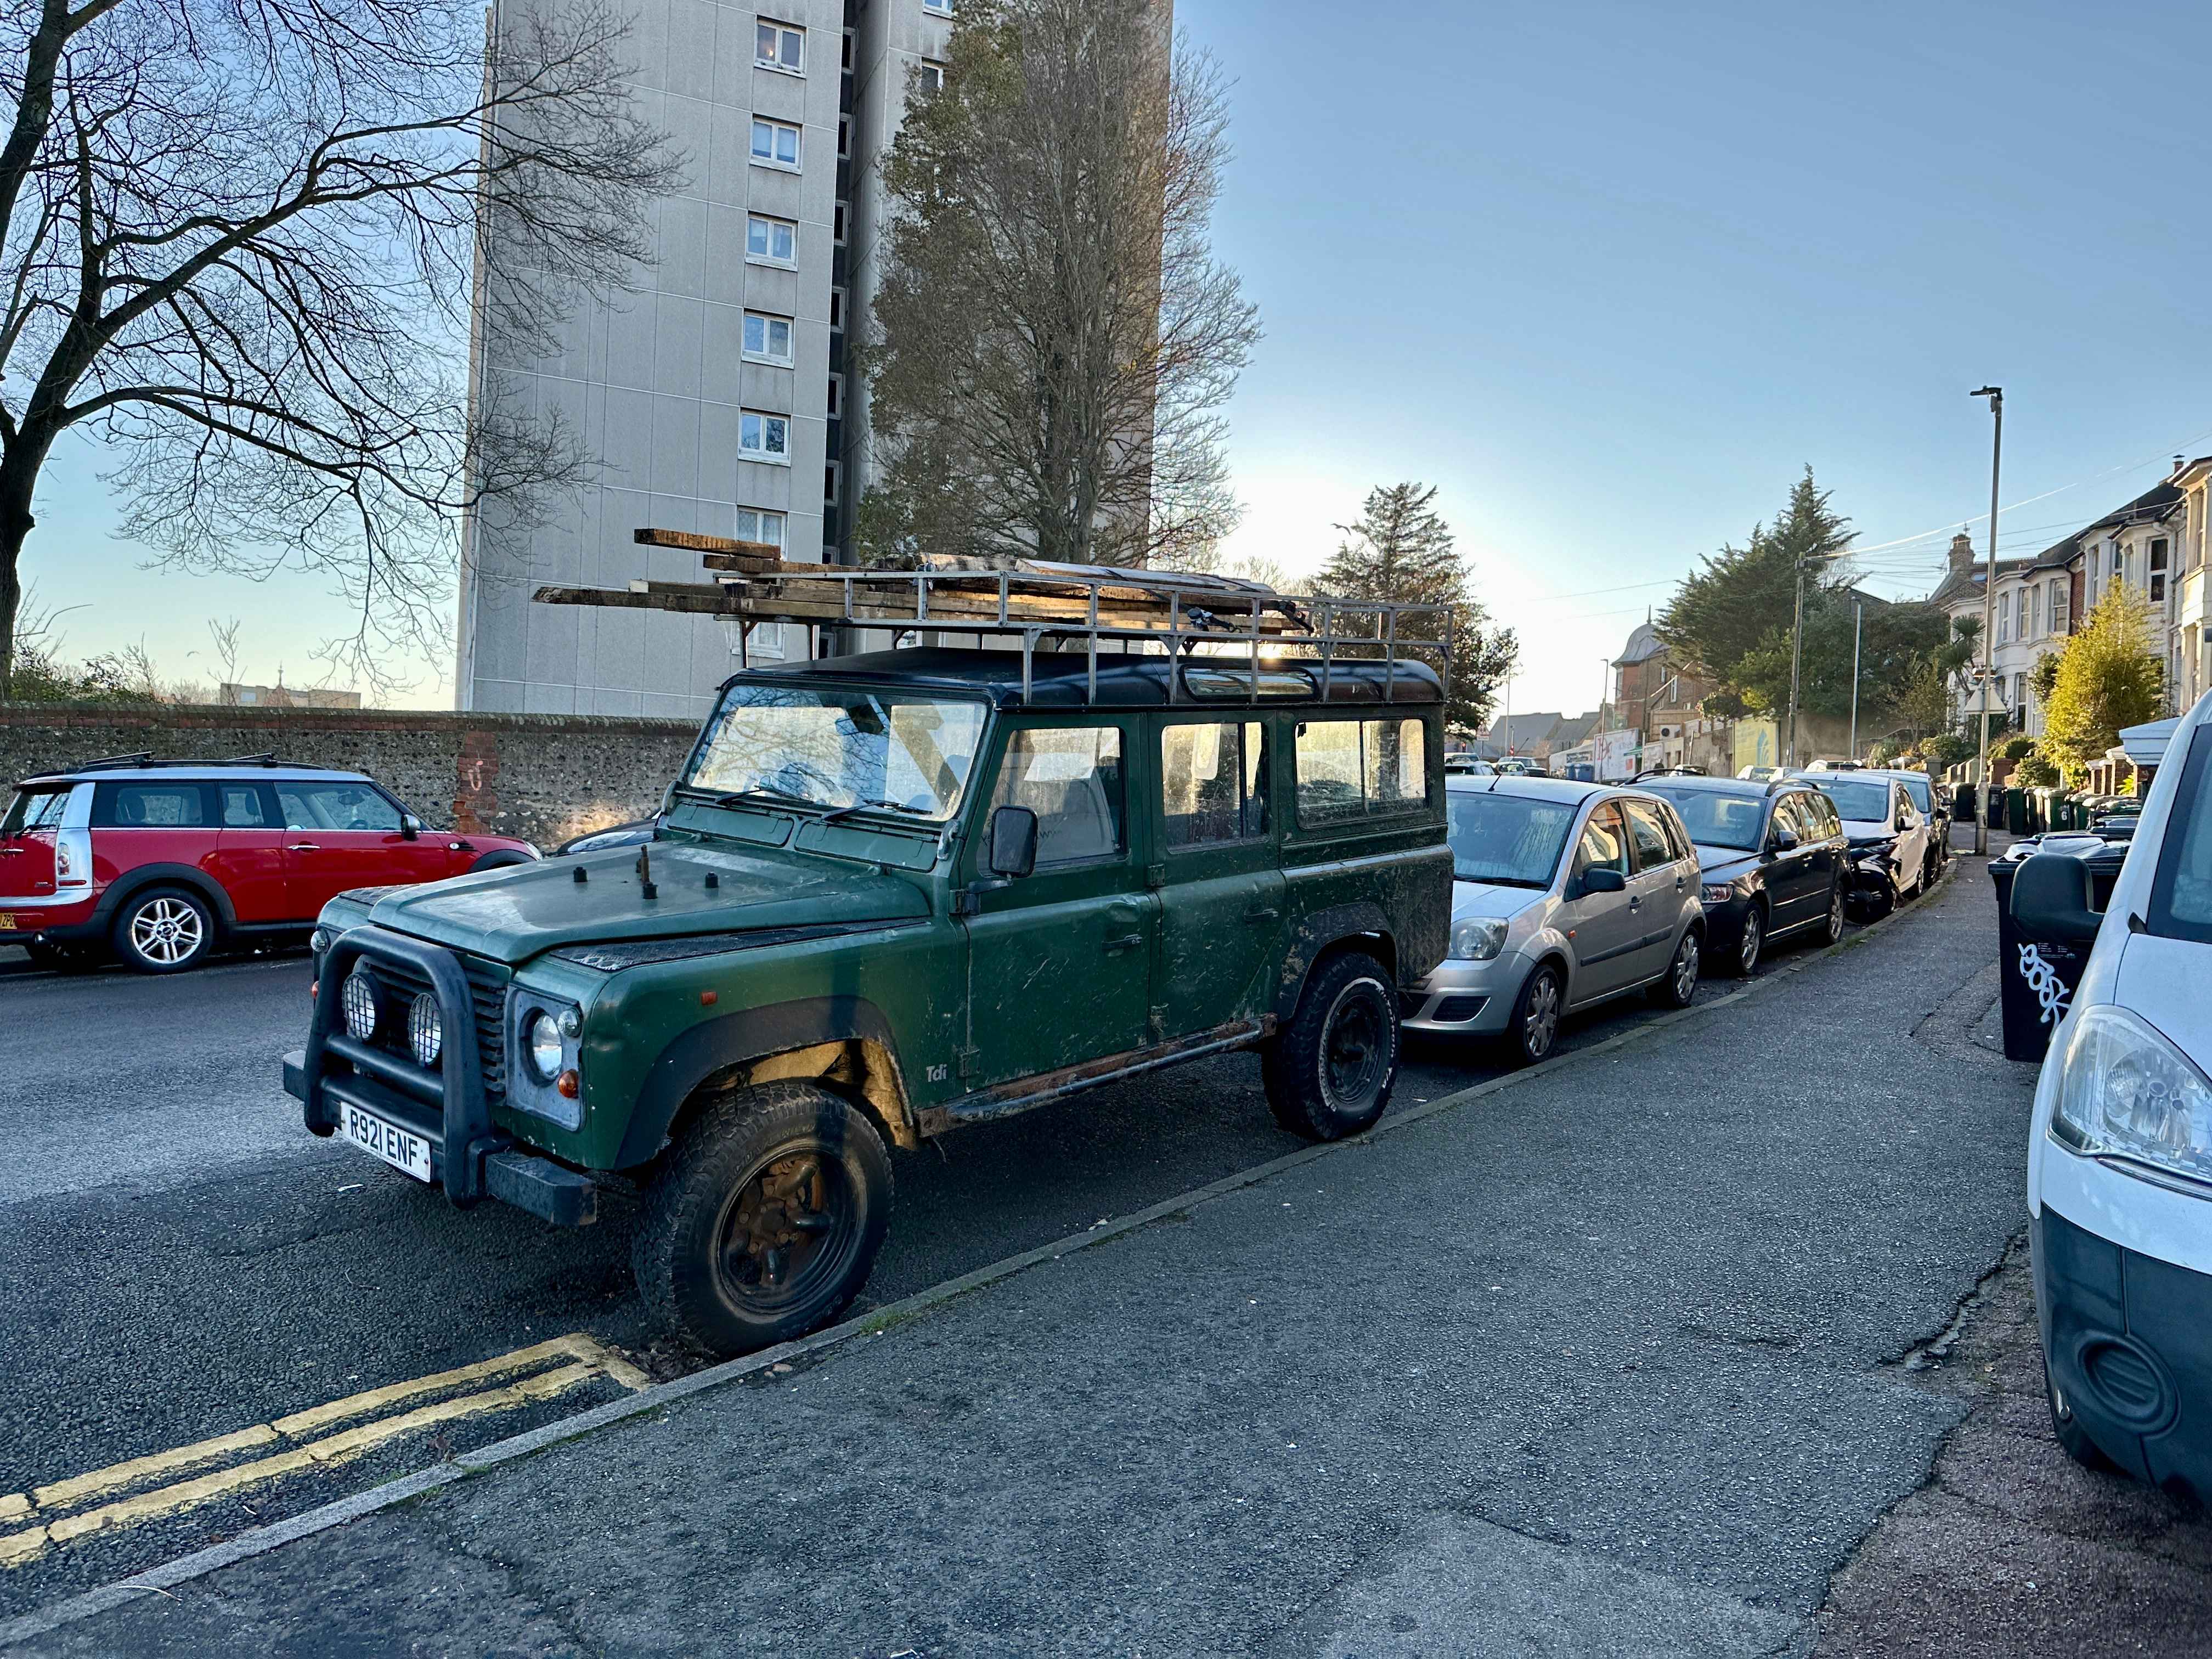 Photograph of R921 ENF - a Green Land Rover Defender parked in Hollingdean by a non-resident. The third of three photographs supplied by the residents of Hollingdean.